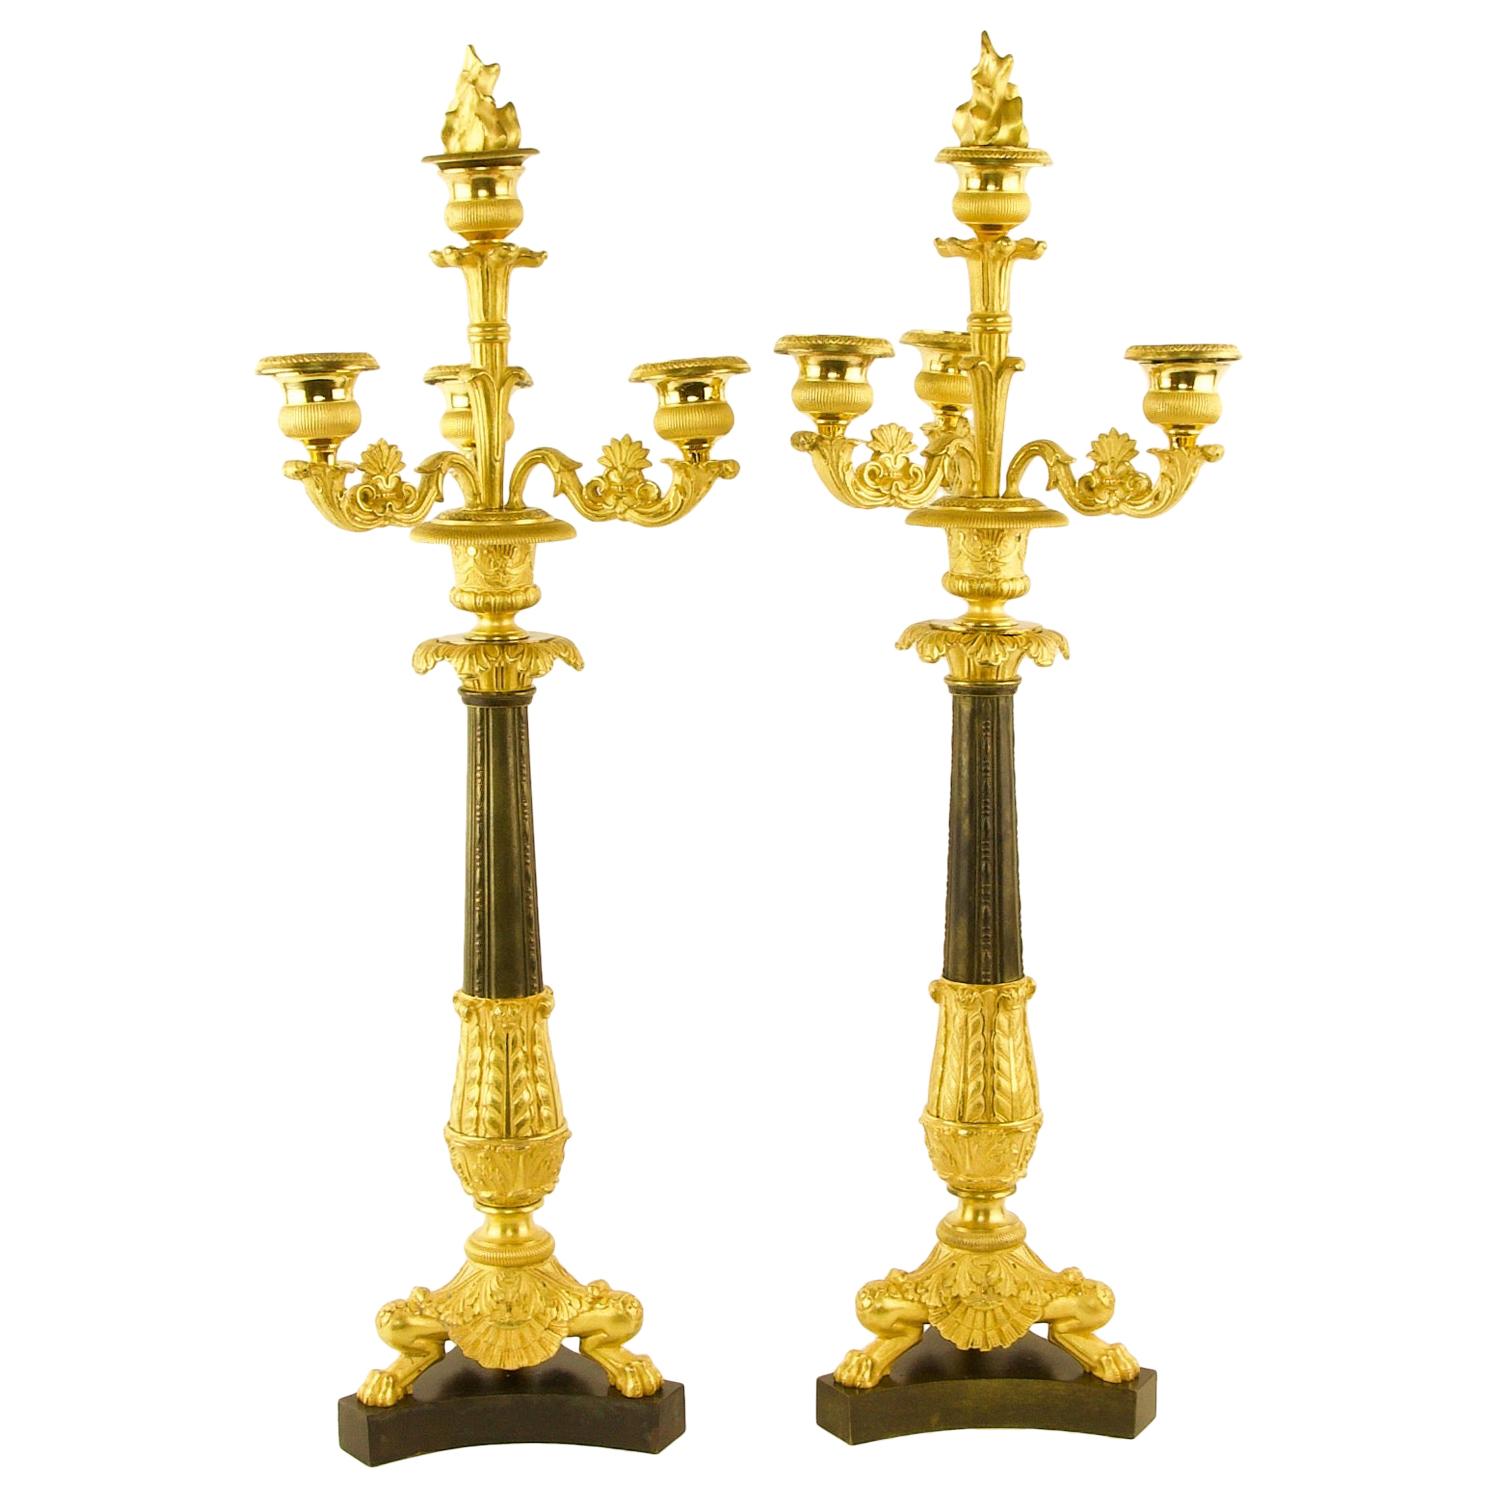 Pair of 19th Century Empire Ormolu and patinated Bronze Candelabra attr. Thomire